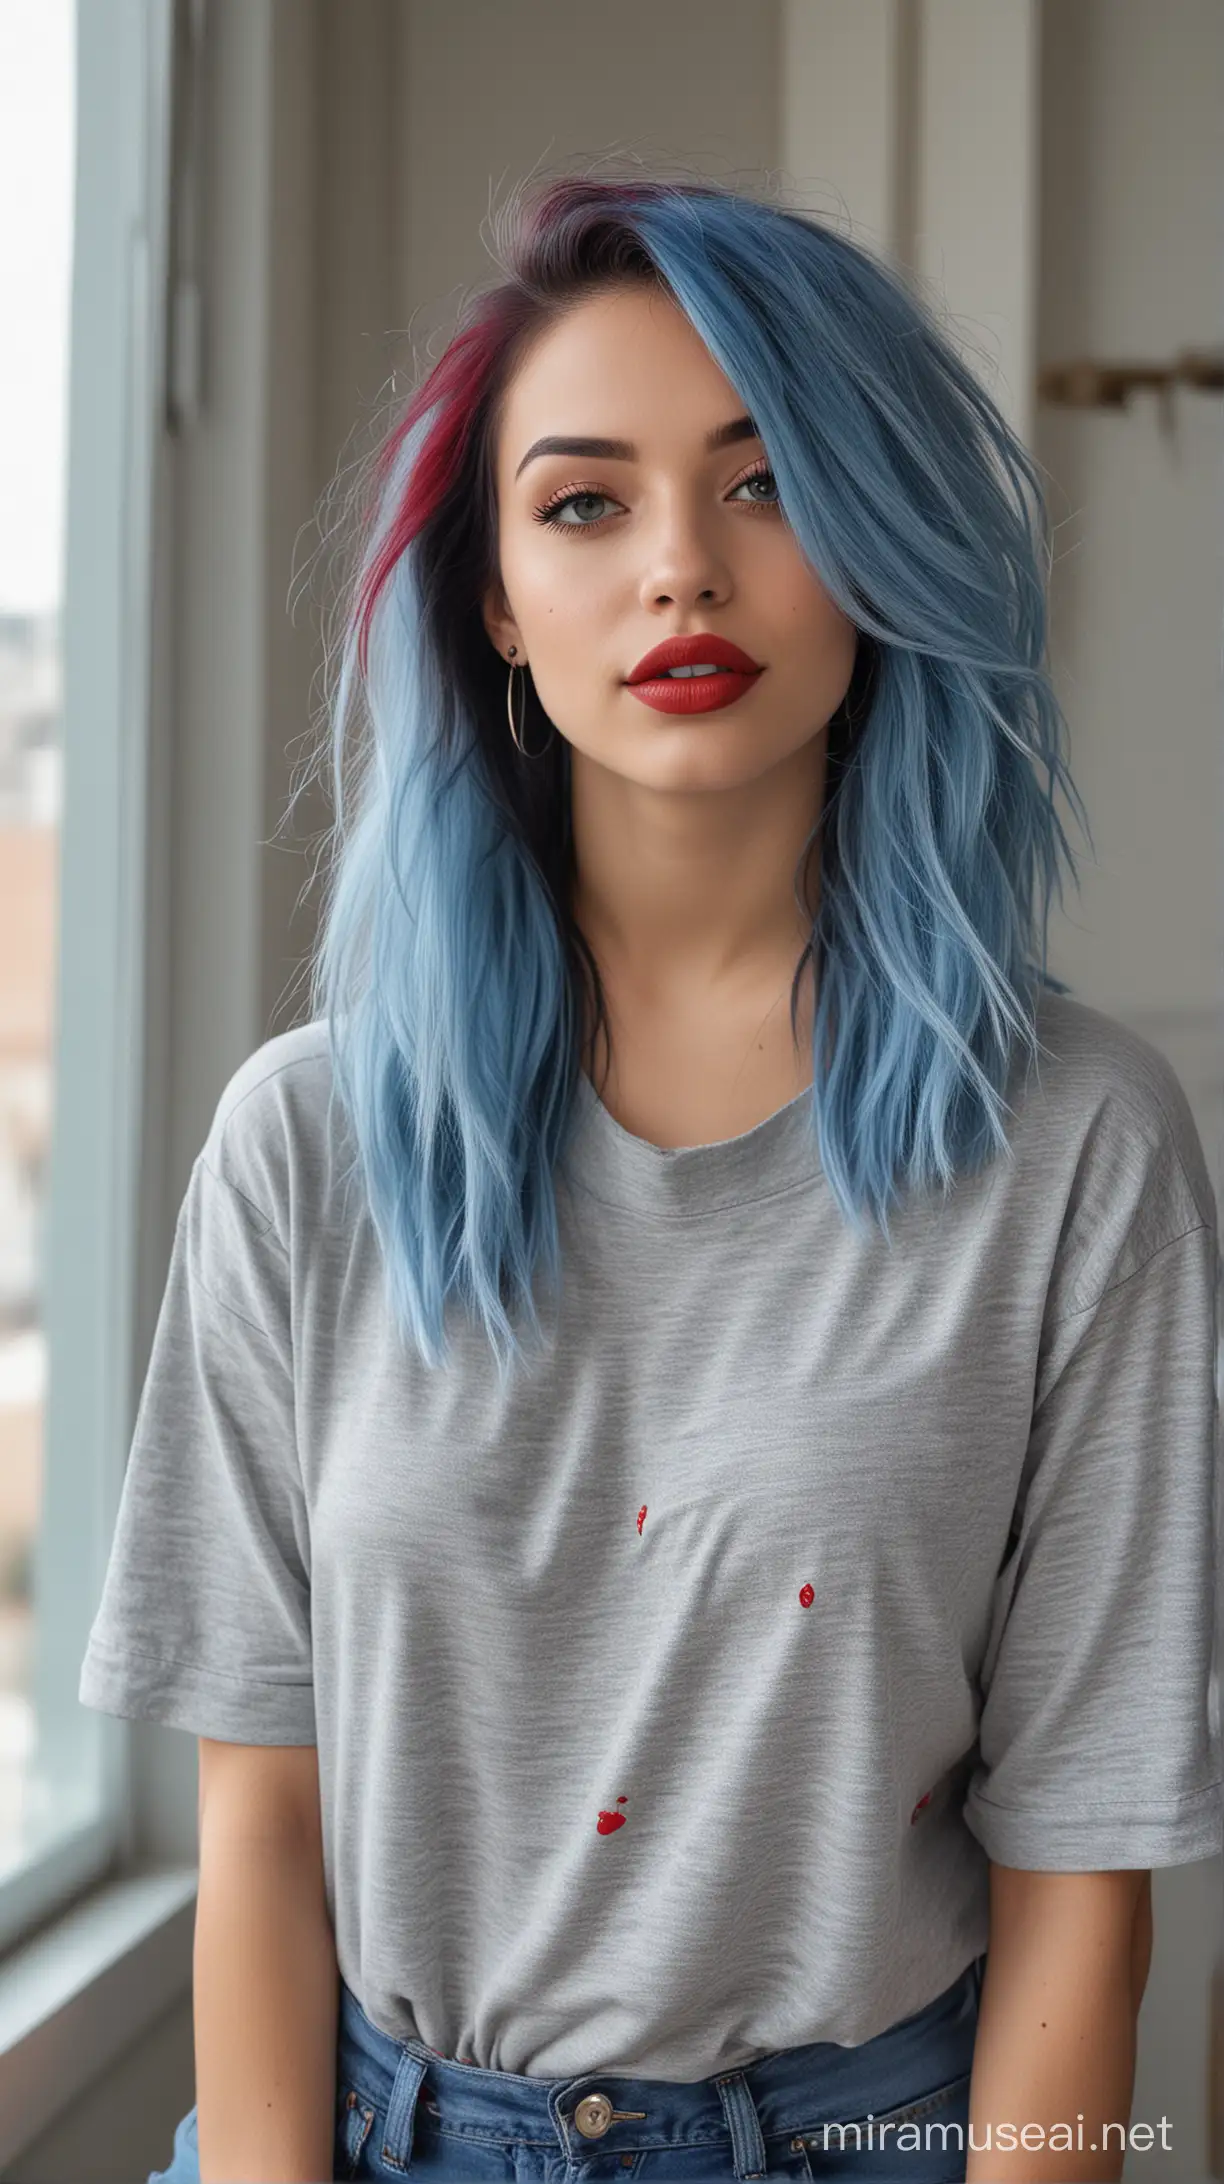 Stylish American Woman with Blue Hair and Red Lipstick Looking out of Home Window